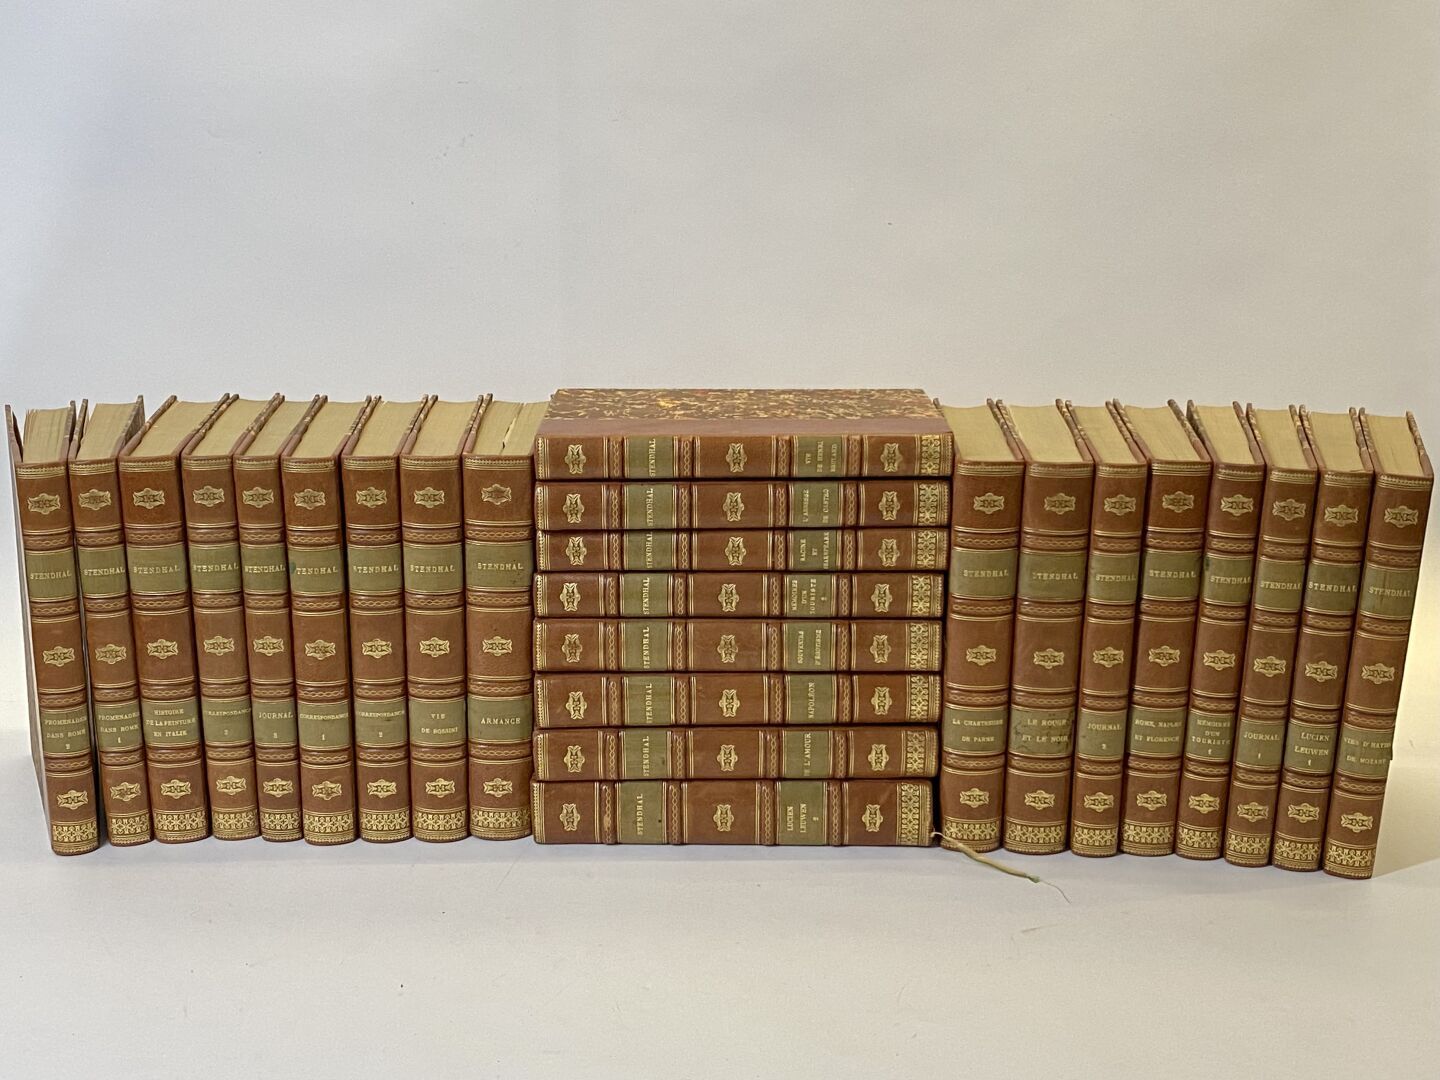 Null Stendhal. Oeuvres complètes, Editions Pierre Larrive. 25 volumes in-4. 

Re&hellip;